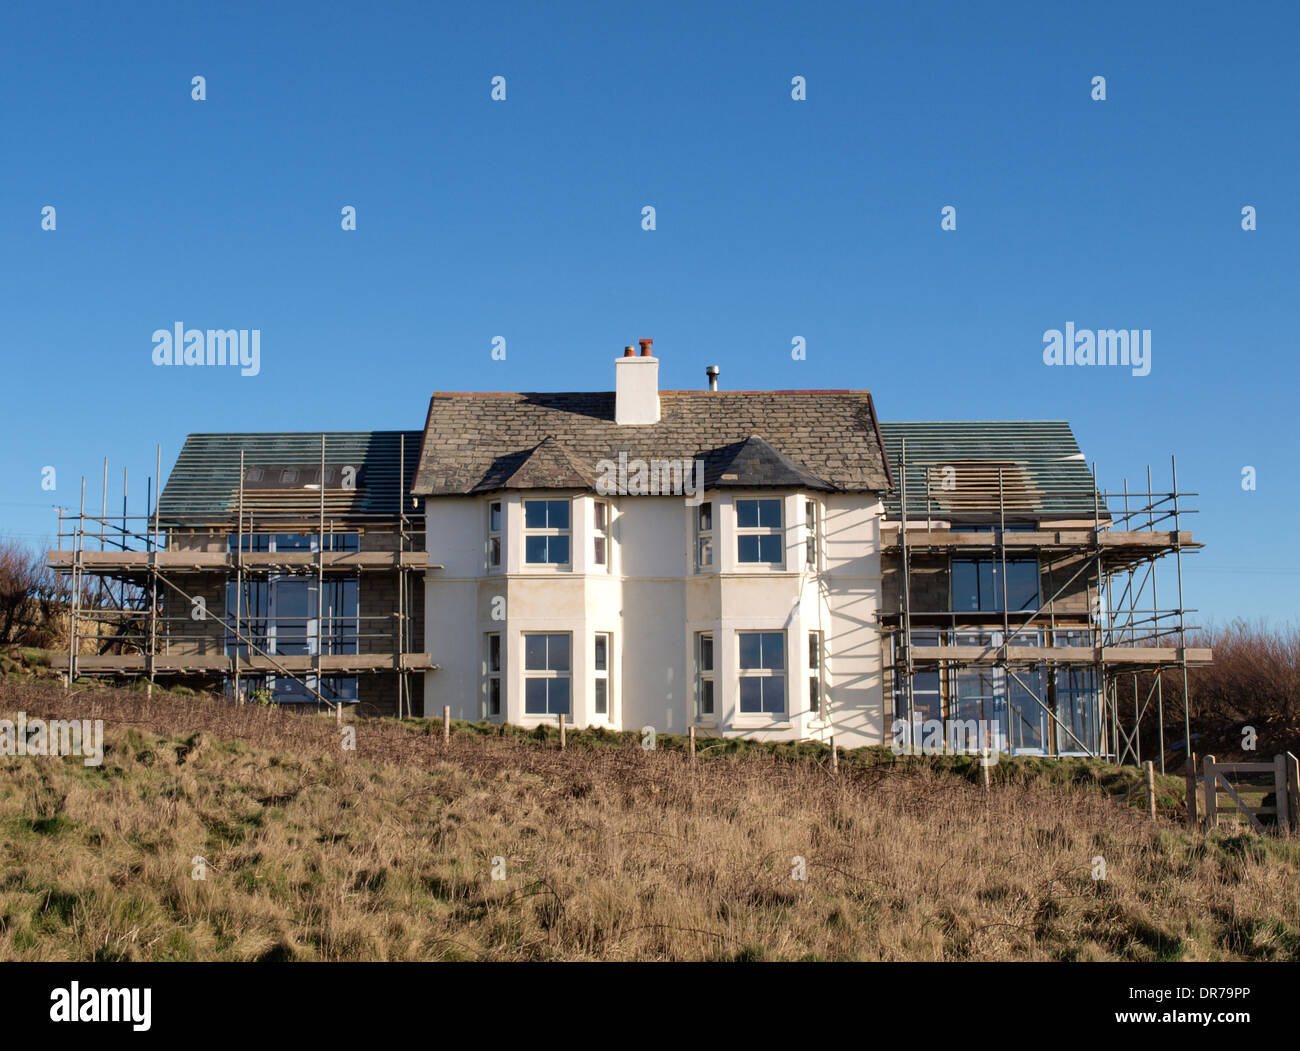 Chambre ayant une double extension, Widemouth Bay, Cornwall, UK Banque D'Images